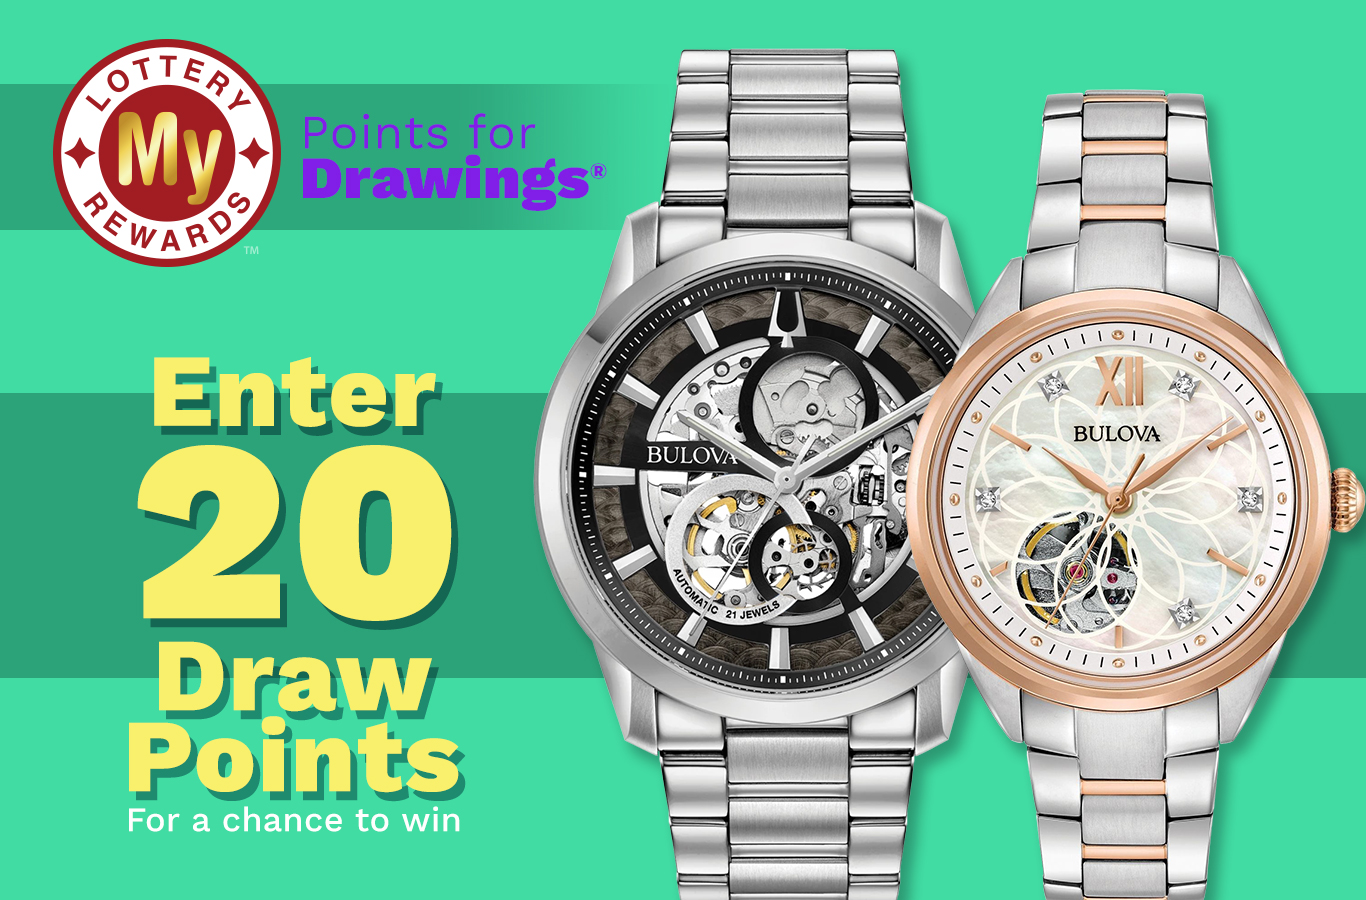 Here's your chance to win a Bulova® Watch Set! Enter by Monday, January 3rd.